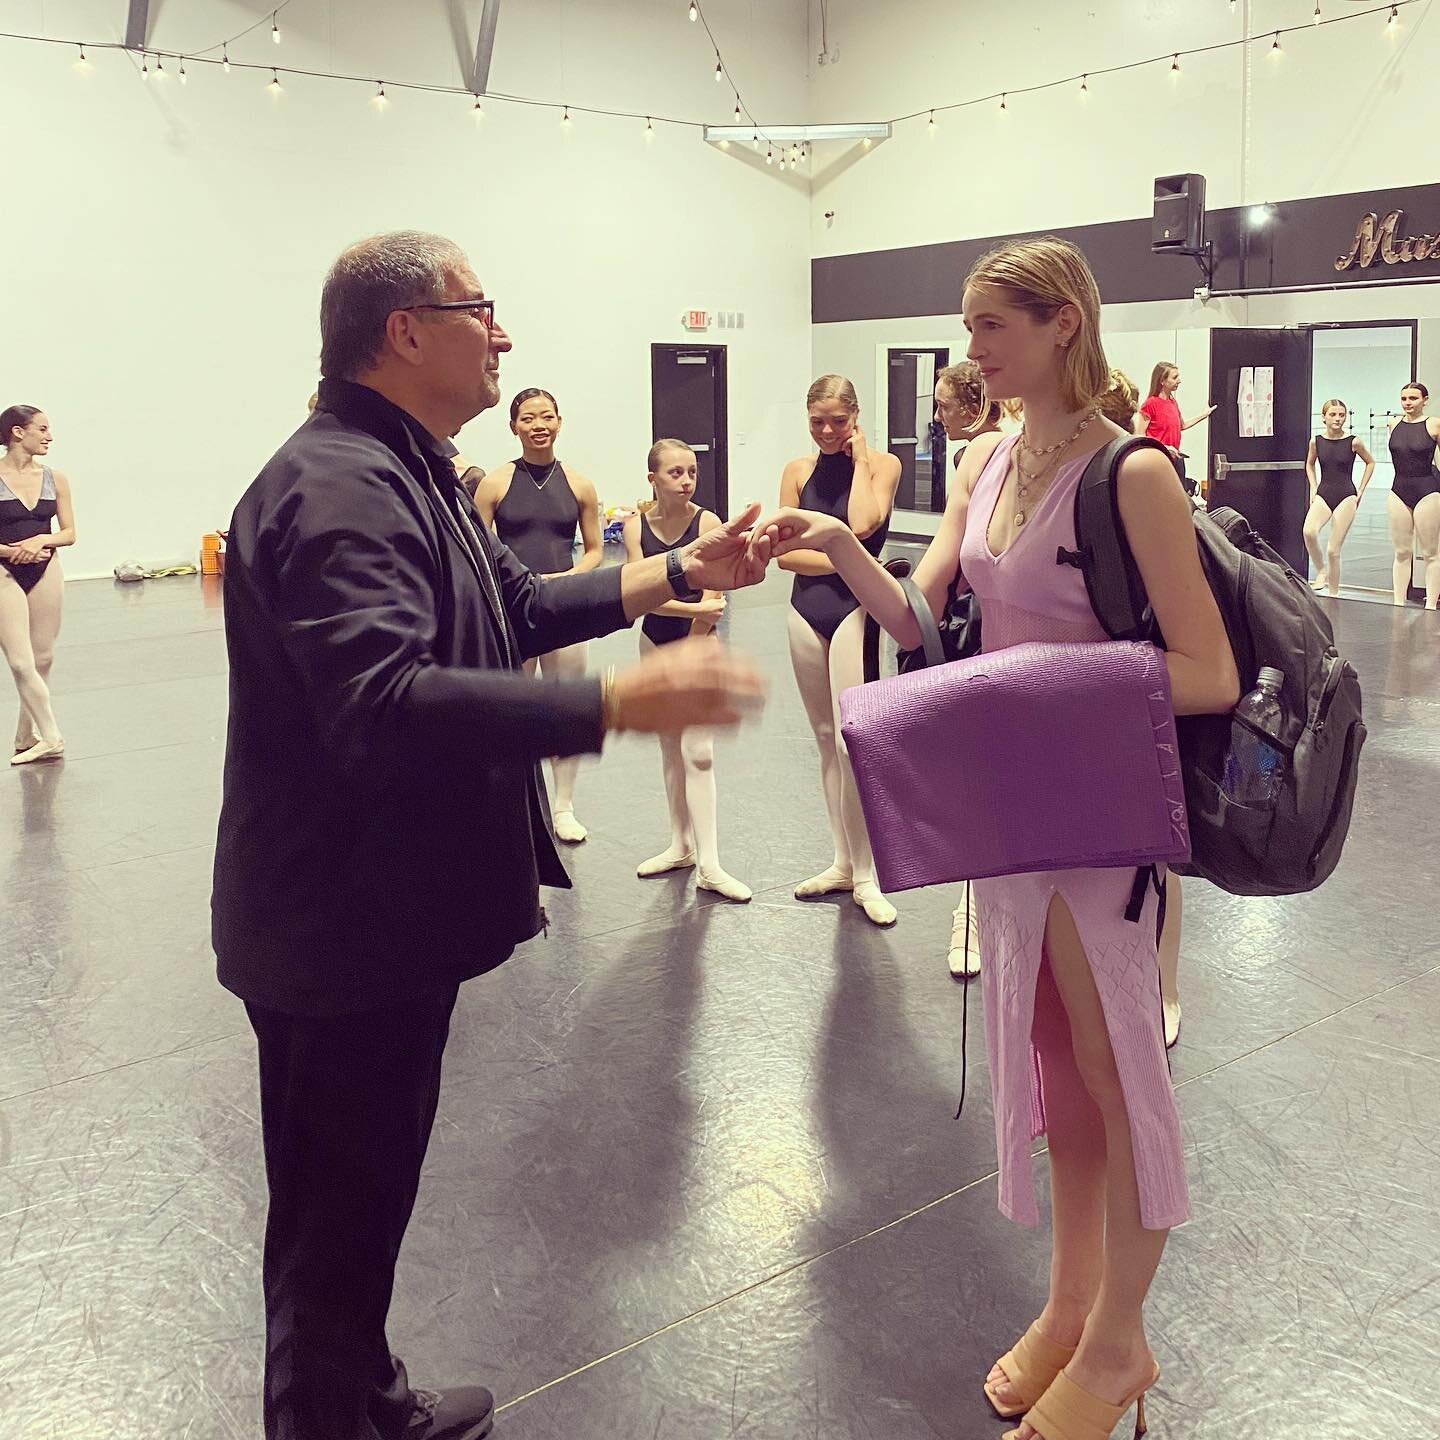 Another wonderful week of ballet here in Nashville. Learning, growing, teaching, sweating 😅 ect... 😉🩰❤️🙏🏻 ( special thanks to @aaroneus for letting me crash the party )